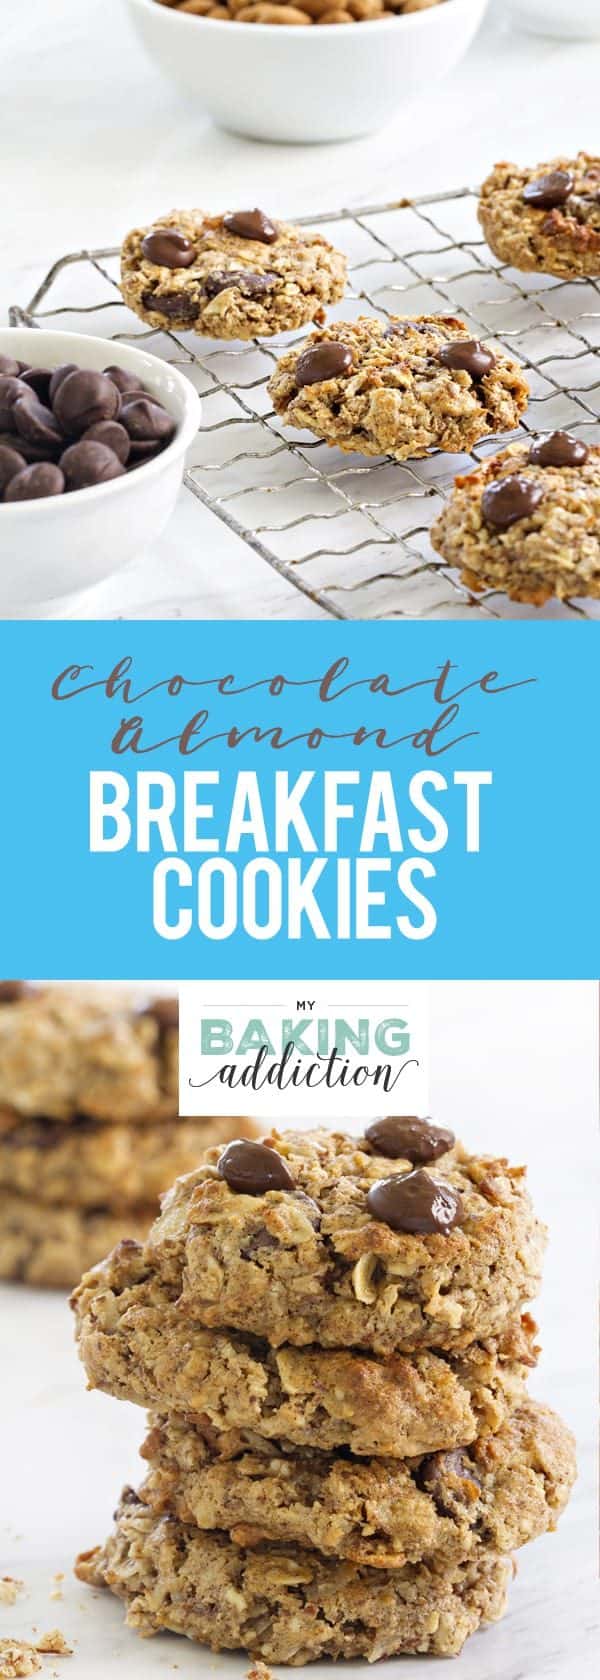 Chocolate Almond Breakfast Cookies are loaded with dark chocolate chips, almonds and coconut.  So good!